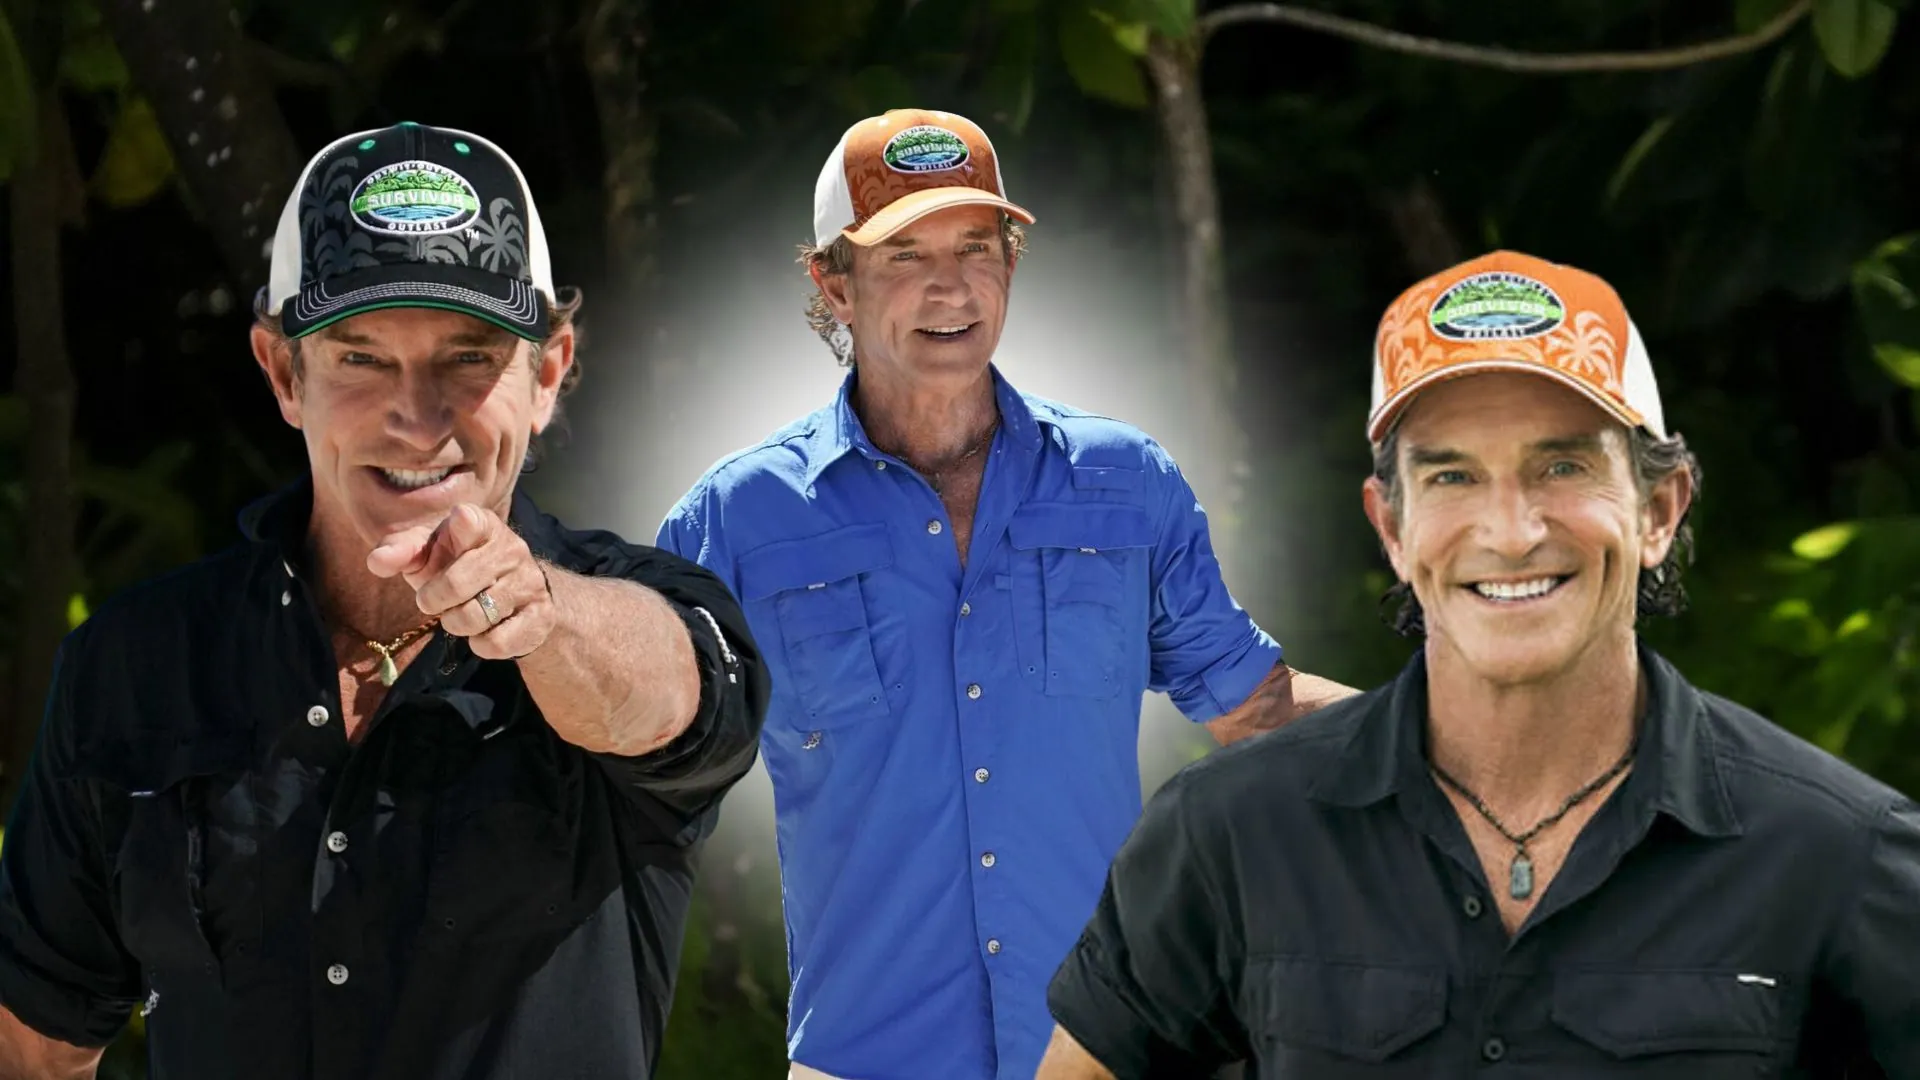 Behind the Scenes of 'Survivor' Jeff Probst on Filming Challenges and His Future